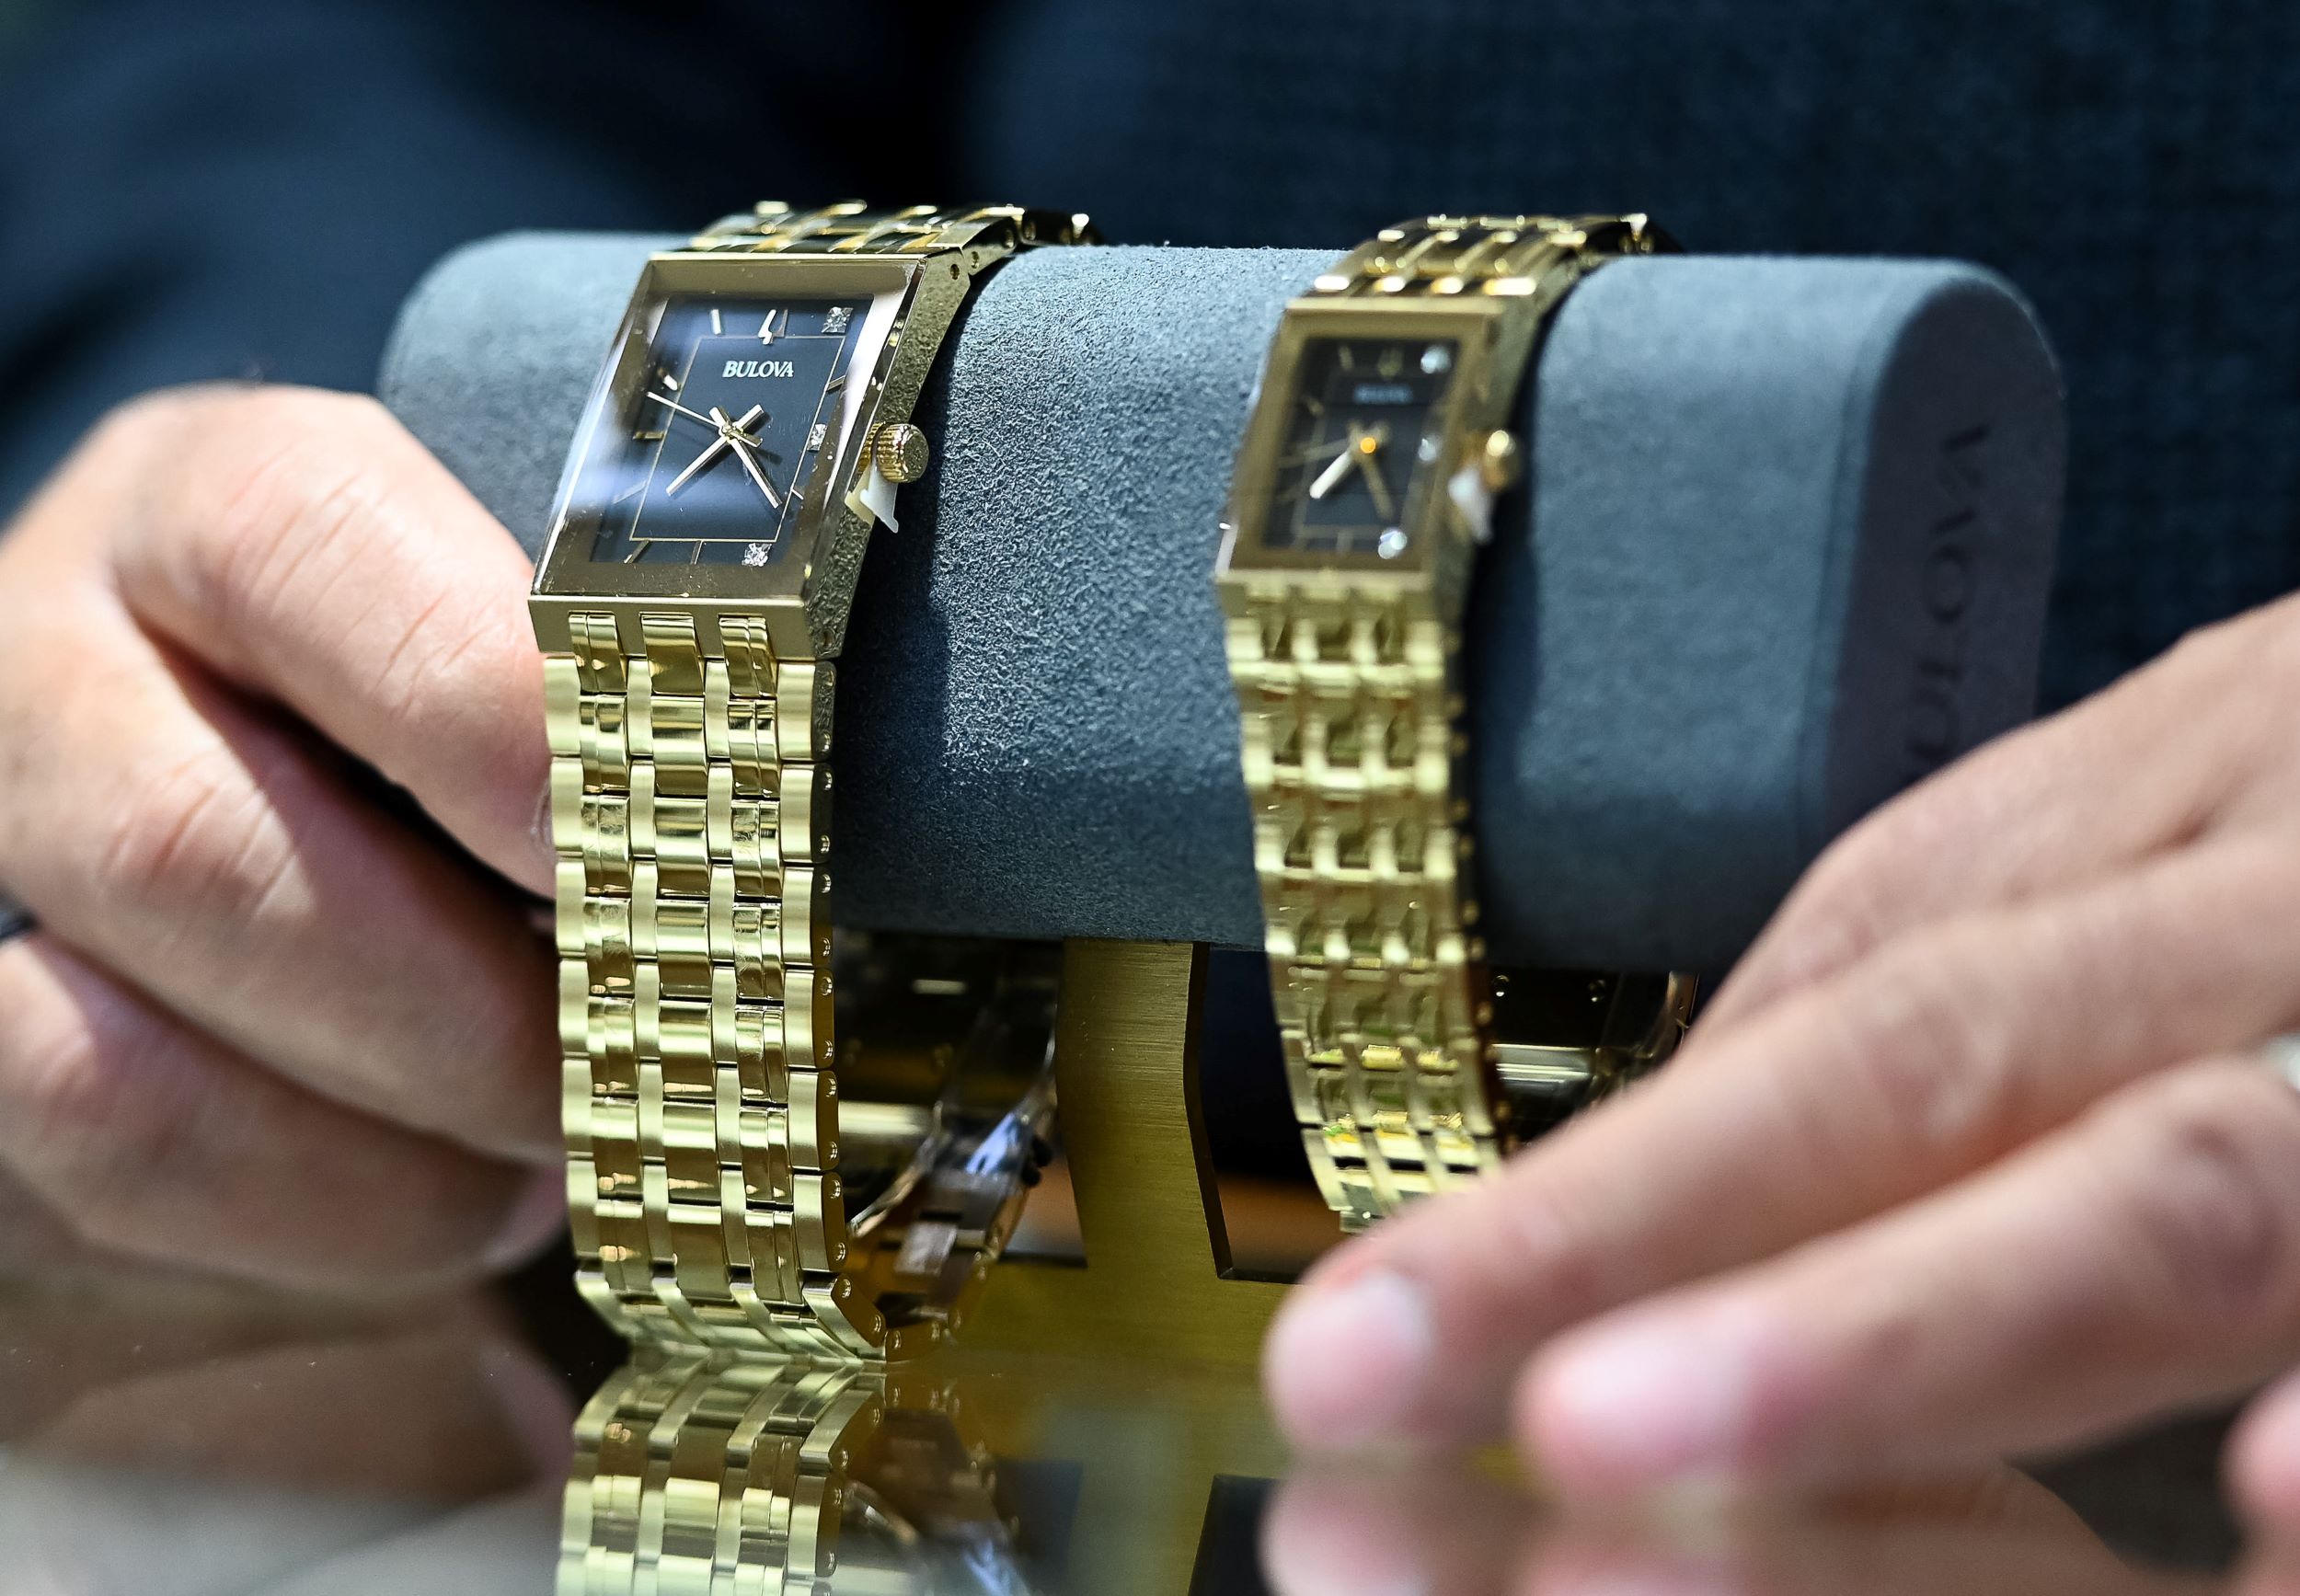 A person's hands adjusting two luxurious gold bulova watches displayed on a gray cushion, highlighting the elegant design and reflective surfaces.